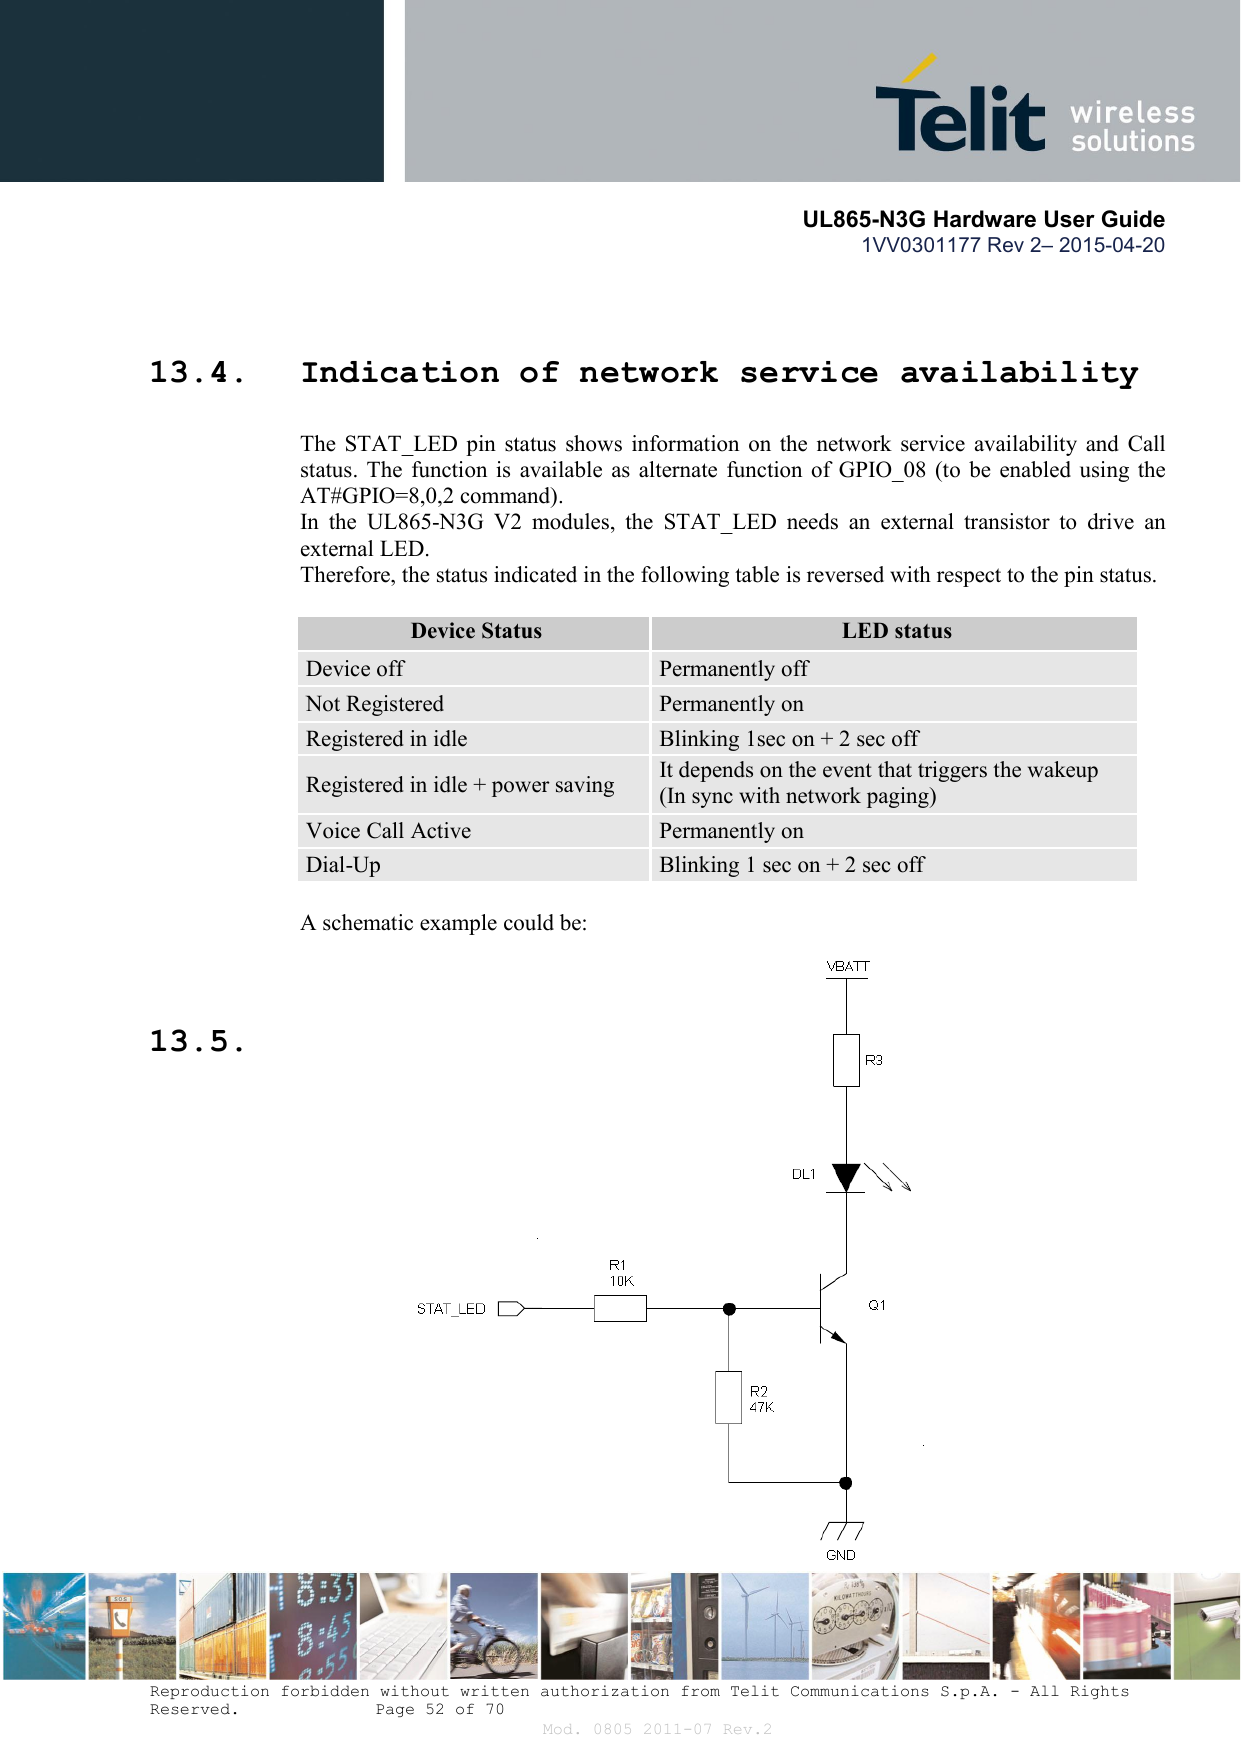       UL865-N3G Hardware User Guide 1VV0301177 Rev 2– 2015-04-20  Reproduction forbidden without written authorization from Telit Communications S.p.A. - All Rights Reserved.    Page 52 of 70 Mod. 0805 2011-07 Rev.2  13.4. Indication of network service availability The  STAT_LED  pin  status  shows  information  on  the  network  service  availability  and  Call status. The  function is  available  as  alternate function  of  GPIO_08  (to  be  enabled  using  the AT#GPIO=8,0,2 command). In  the  UL865-N3G  V2  modules,  the  STAT_LED  needs  an  external  transistor  to  drive  an external LED. Therefore, the status indicated in the following table is reversed with respect to the pin status.  Device Status LED status Device off  Permanently off Not Registered  Permanently on Registered in idle  Blinking 1sec on + 2 sec off Registered in idle + power saving  It depends on the event that triggers the wakeup  (In sync with network paging) Voice Call Active  Permanently on Dial-Up  Blinking 1 sec on + 2 sec off  A schematic example could be:  13.5. 